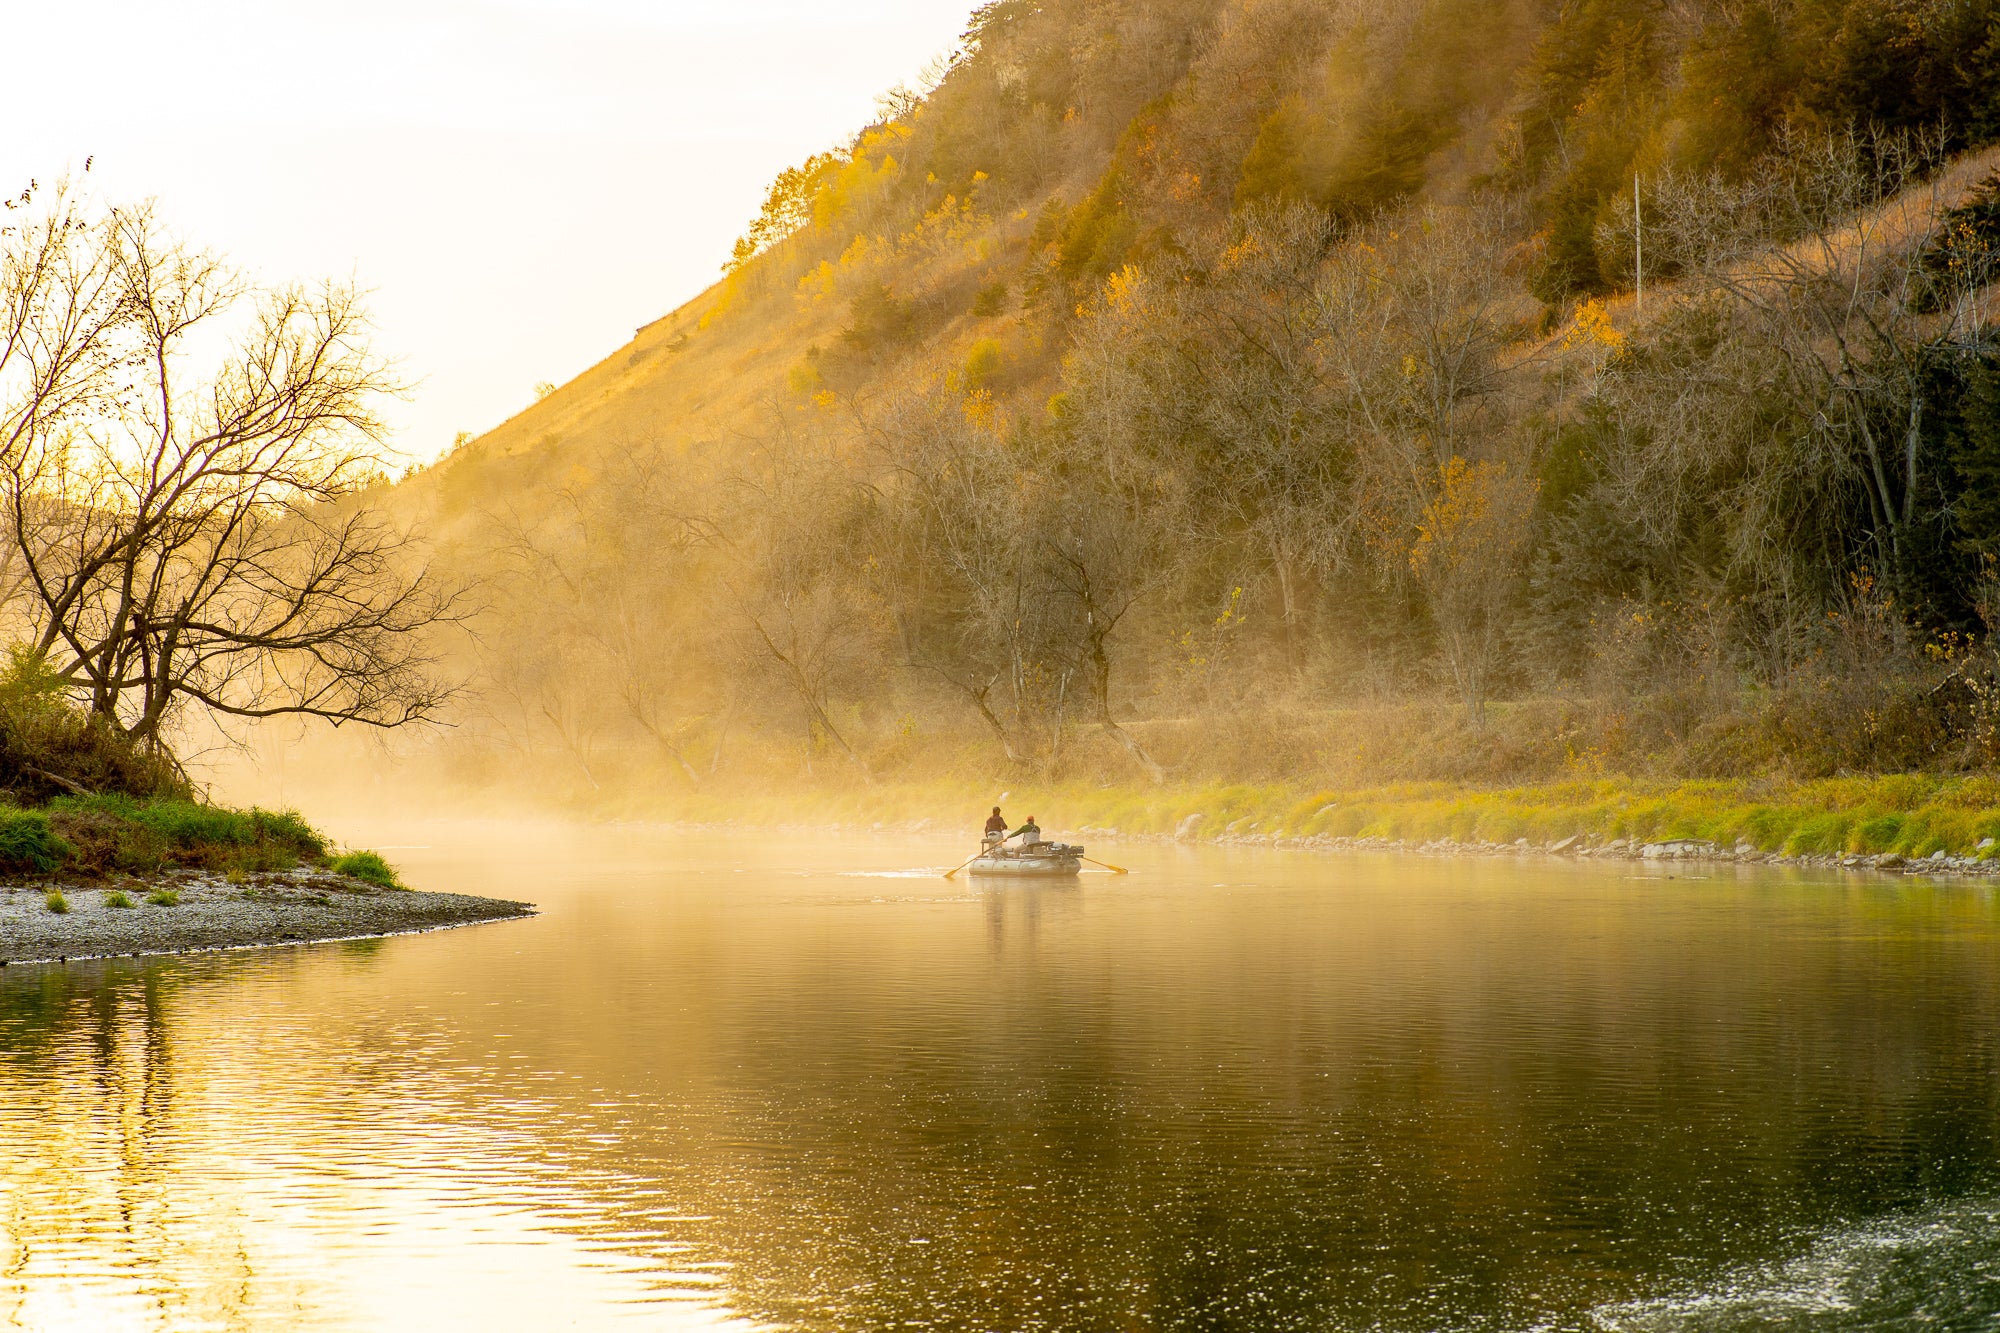 Image of a row boat in the distance on a river during a foggy dawn